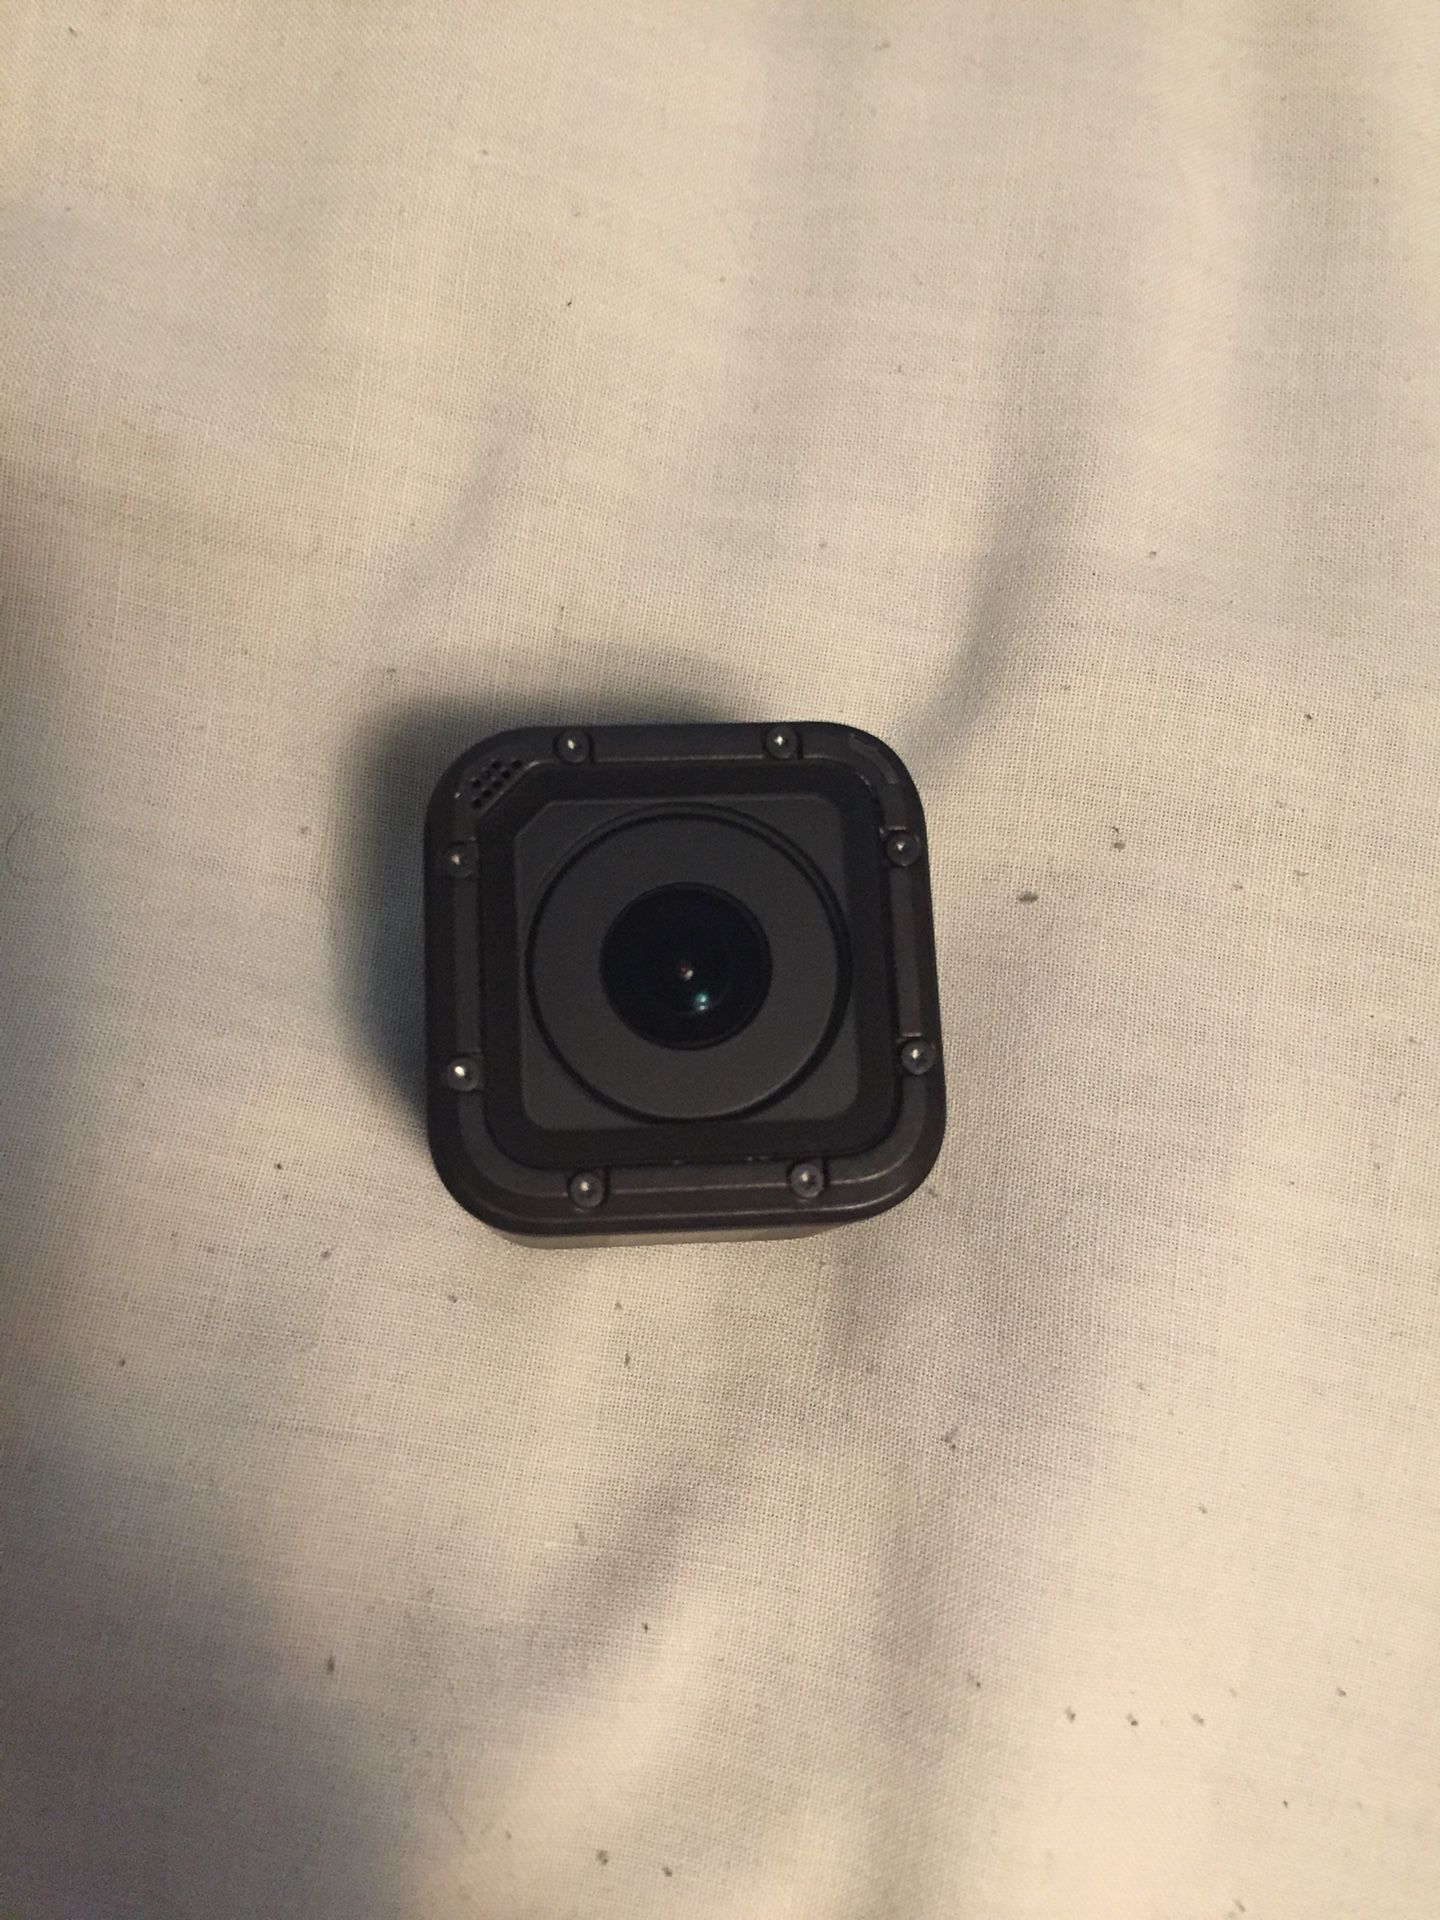 GoPro hero5 session with accessories